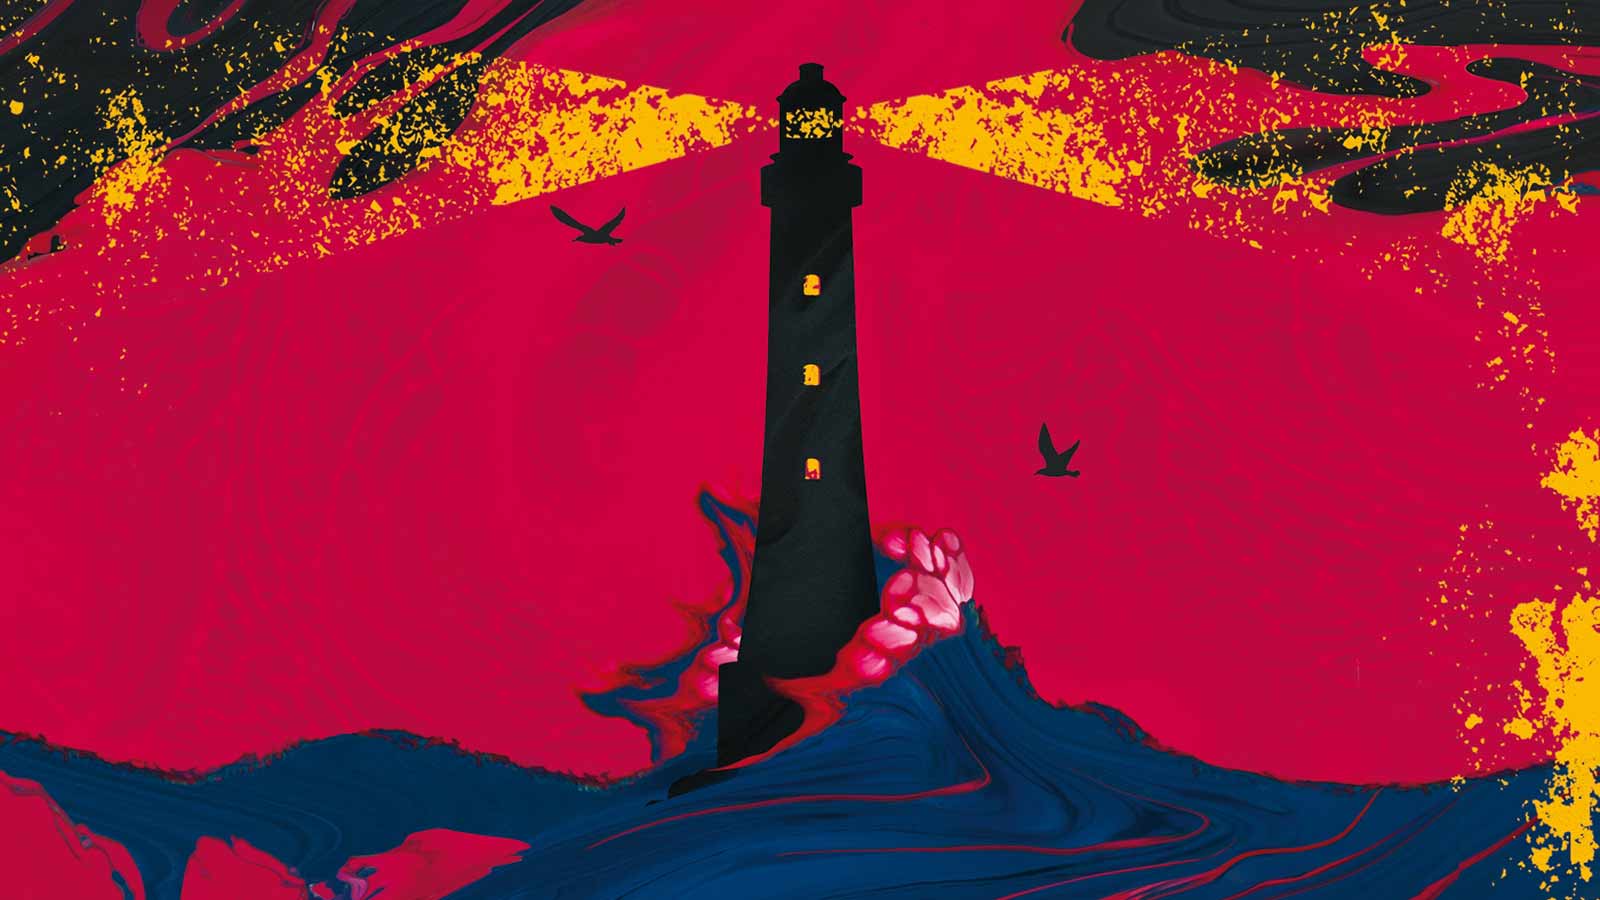 Section of The Lamplighters book cover showing an illustration of a lighthouse